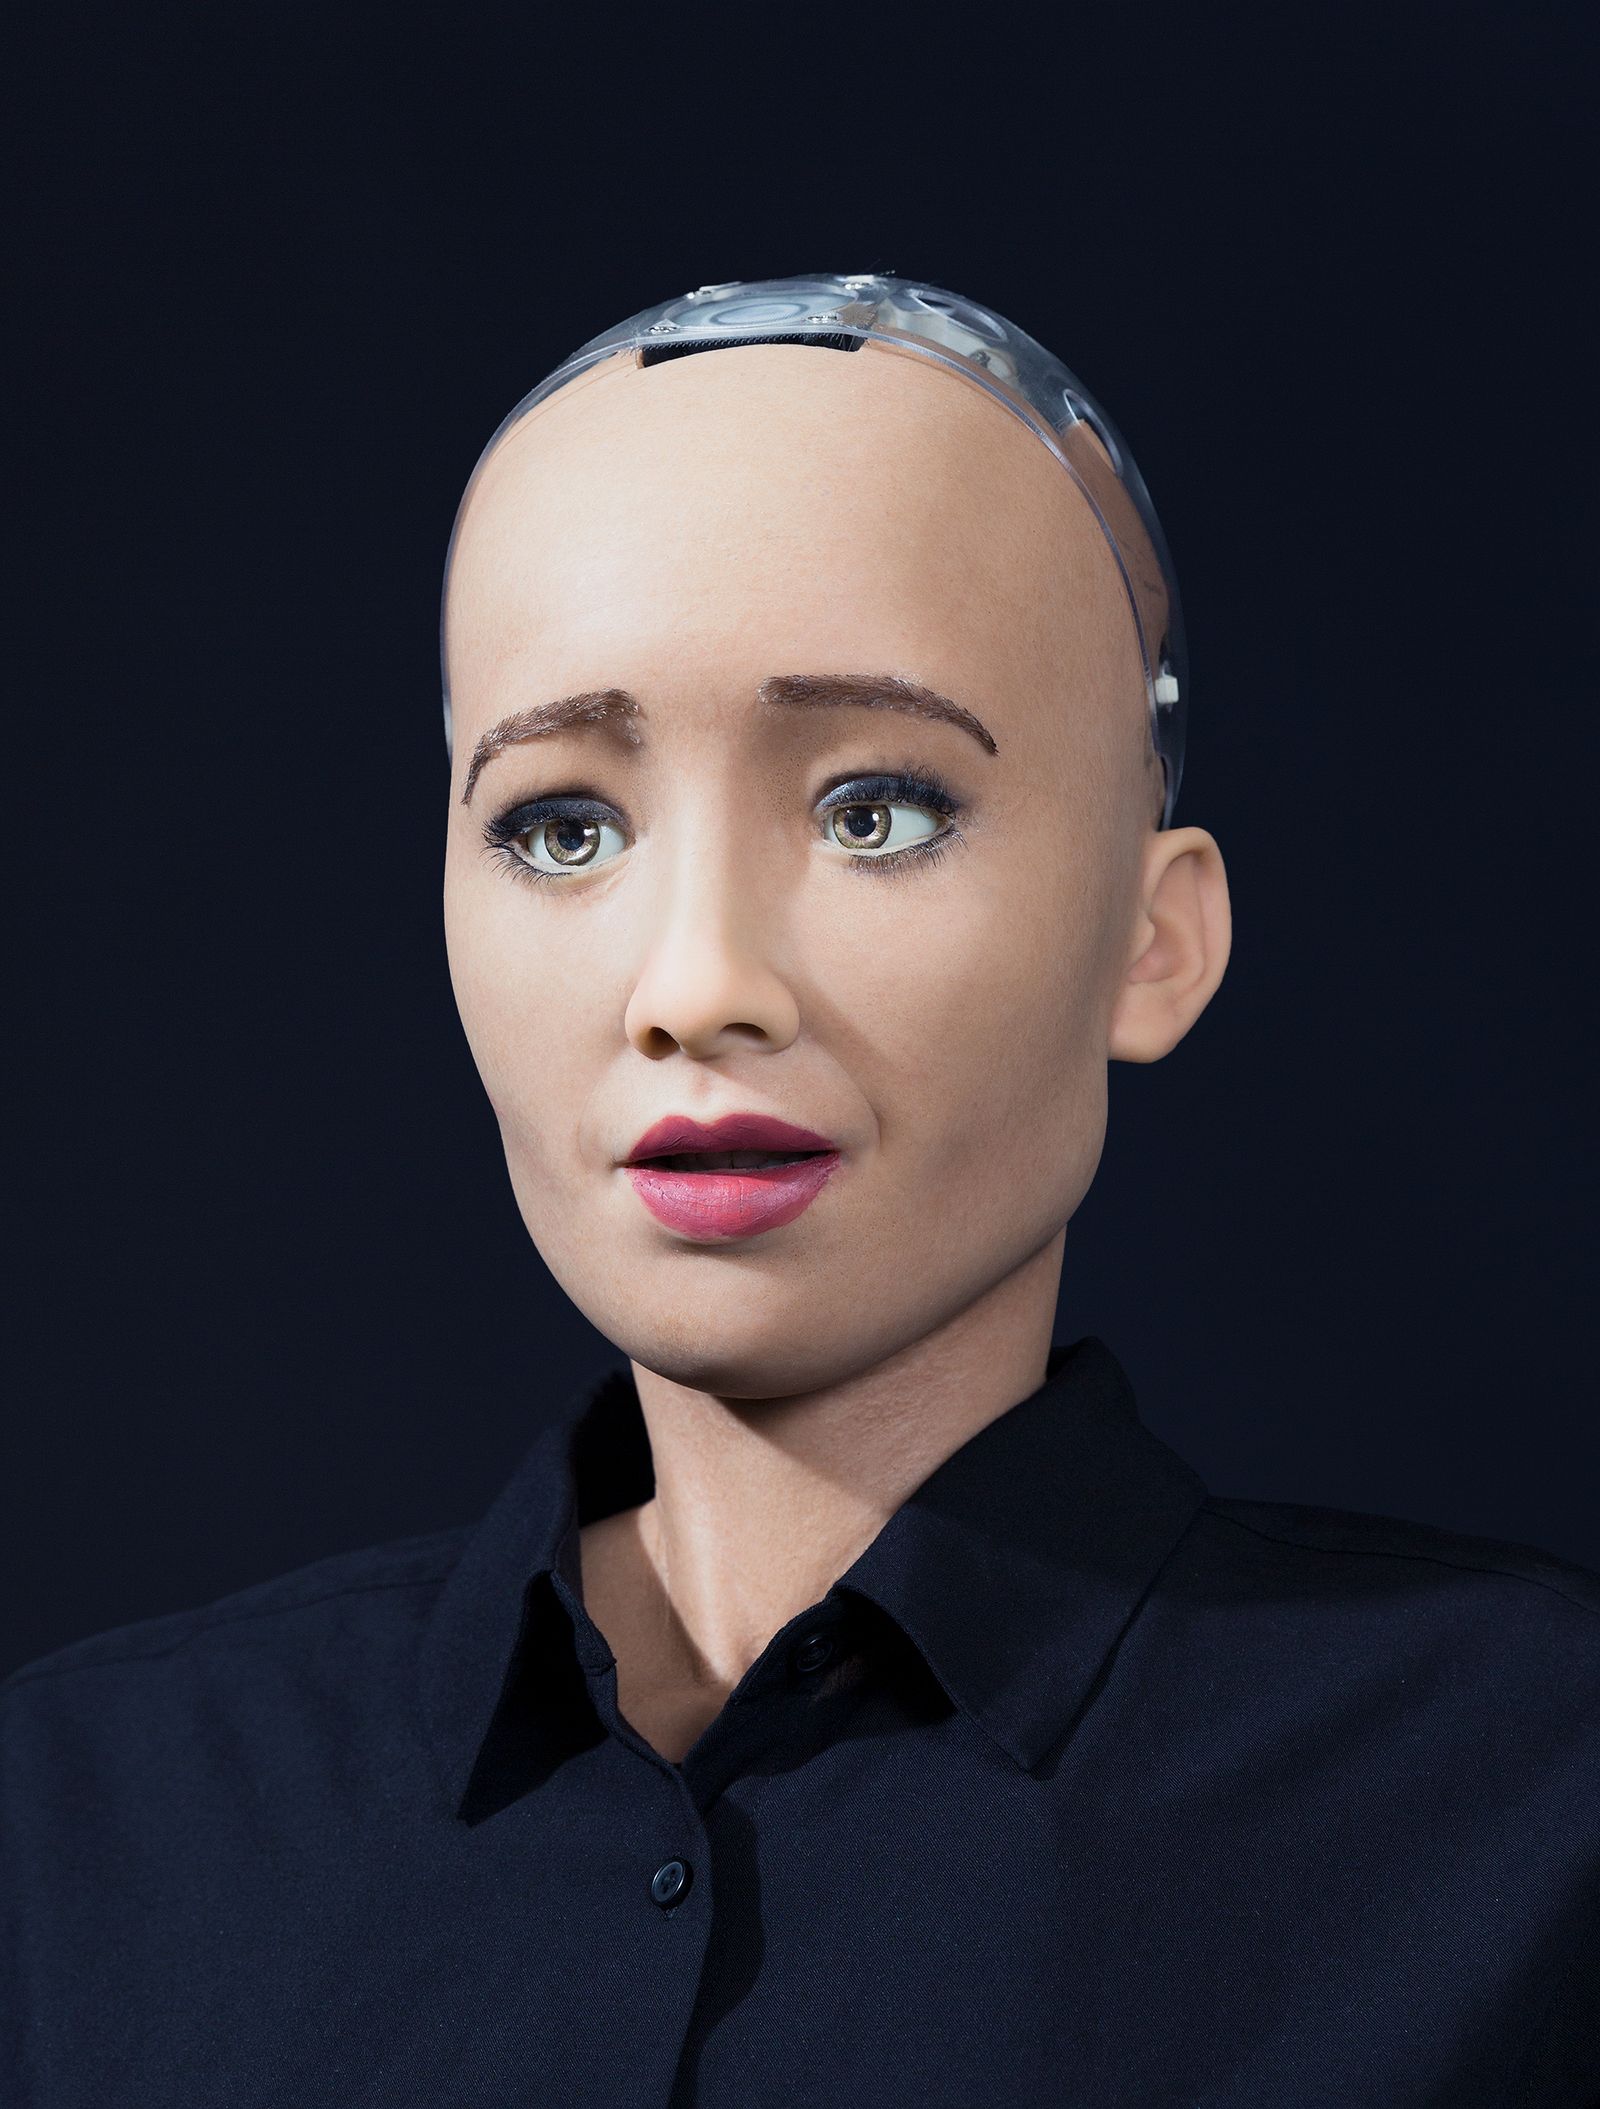 © David Vintiner - Sophia is one of the worlds most advanced humanoid robots capable of displaying over 50 facial expressions.